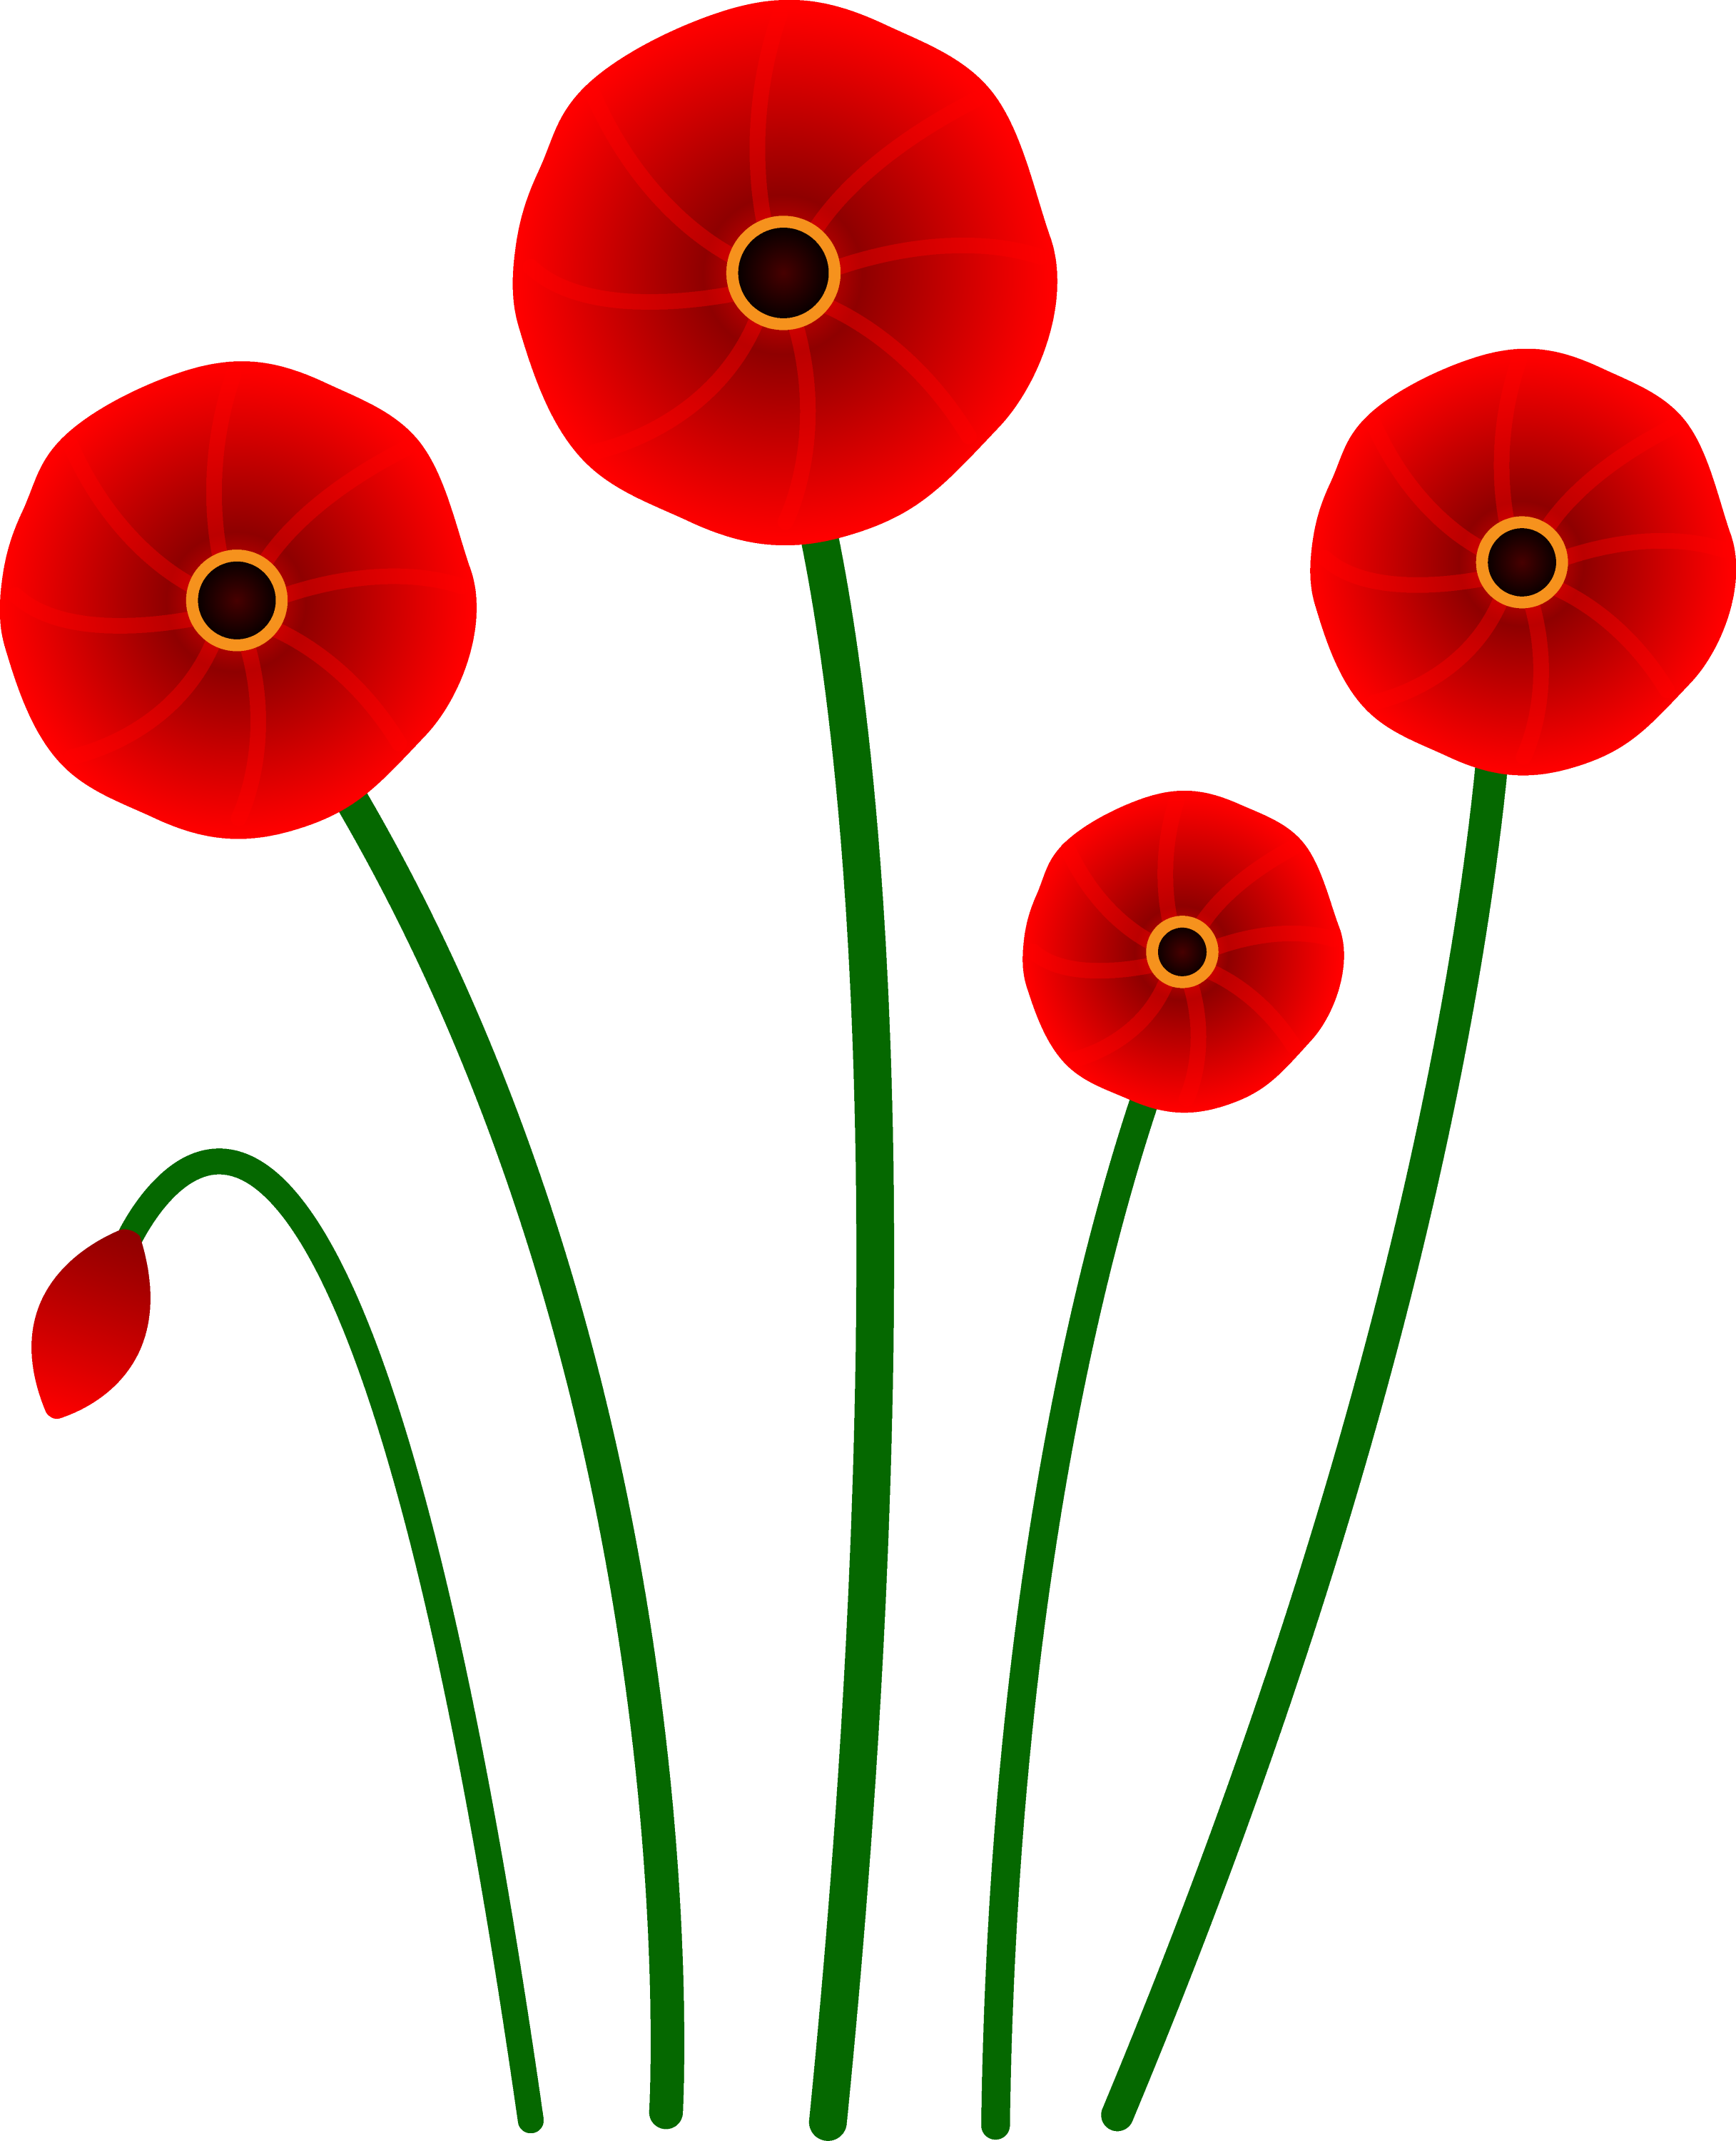 Red Poppy PNG HD Quality